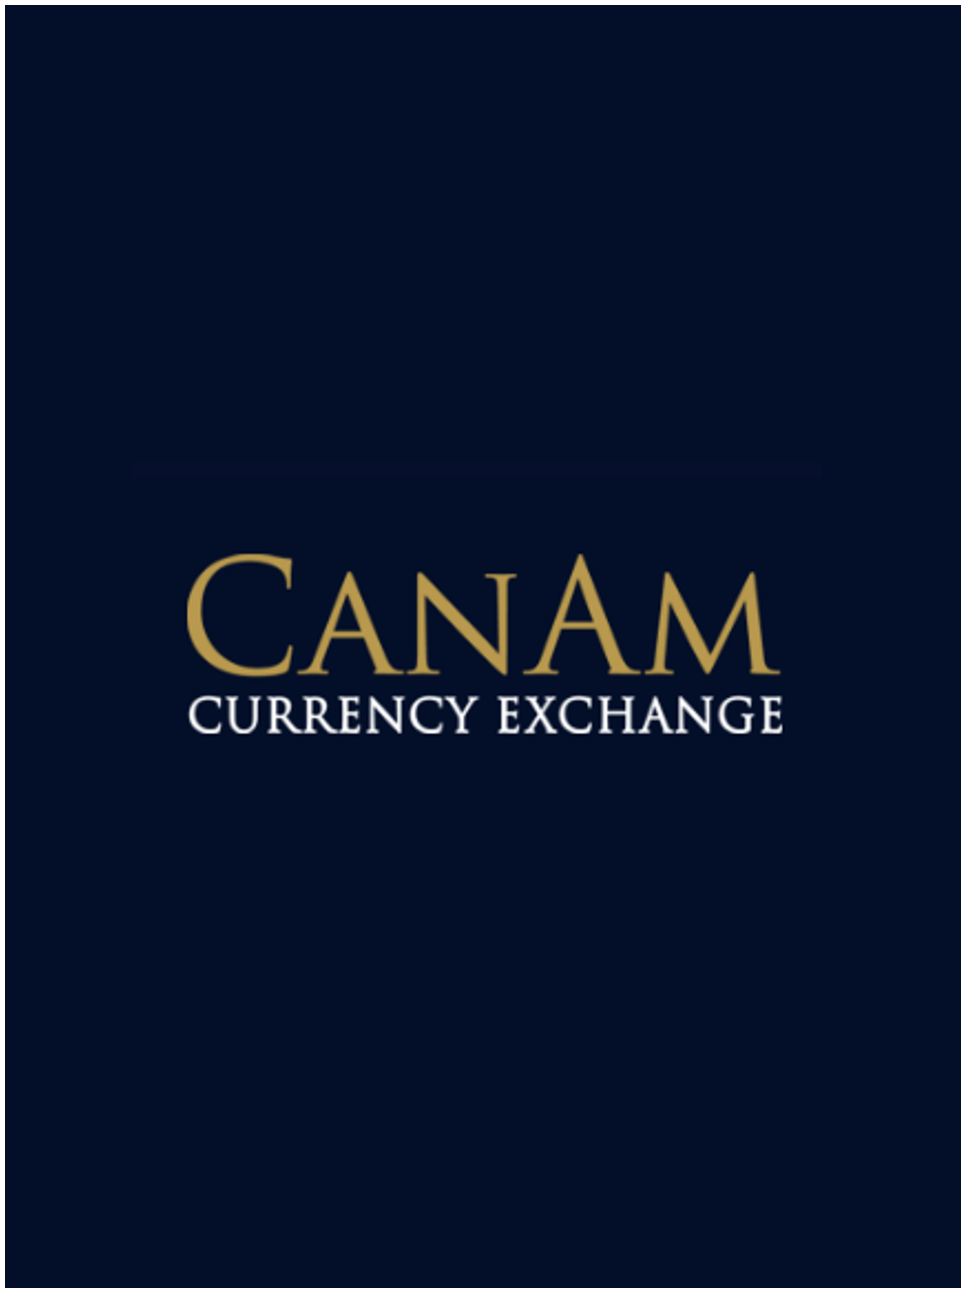 CanAm Currency Exchange Offers Guaranteed CAD/USD Best Rates In Detroit